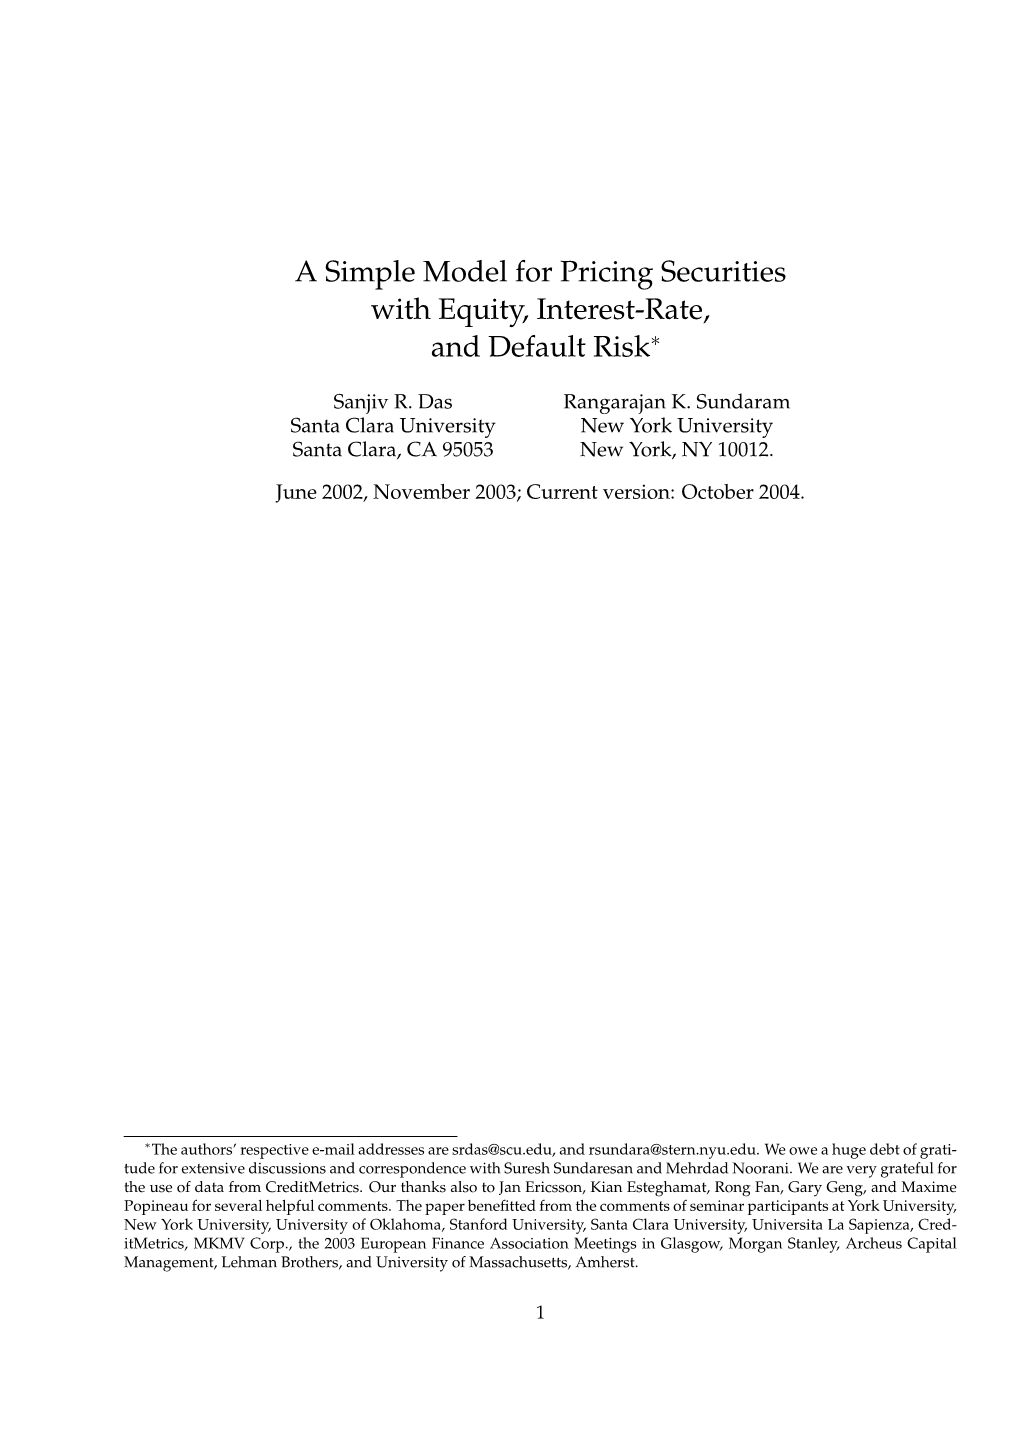 A Simple Model for Pricing Securities with Equity, Interest-Rate, and Default Risk∗